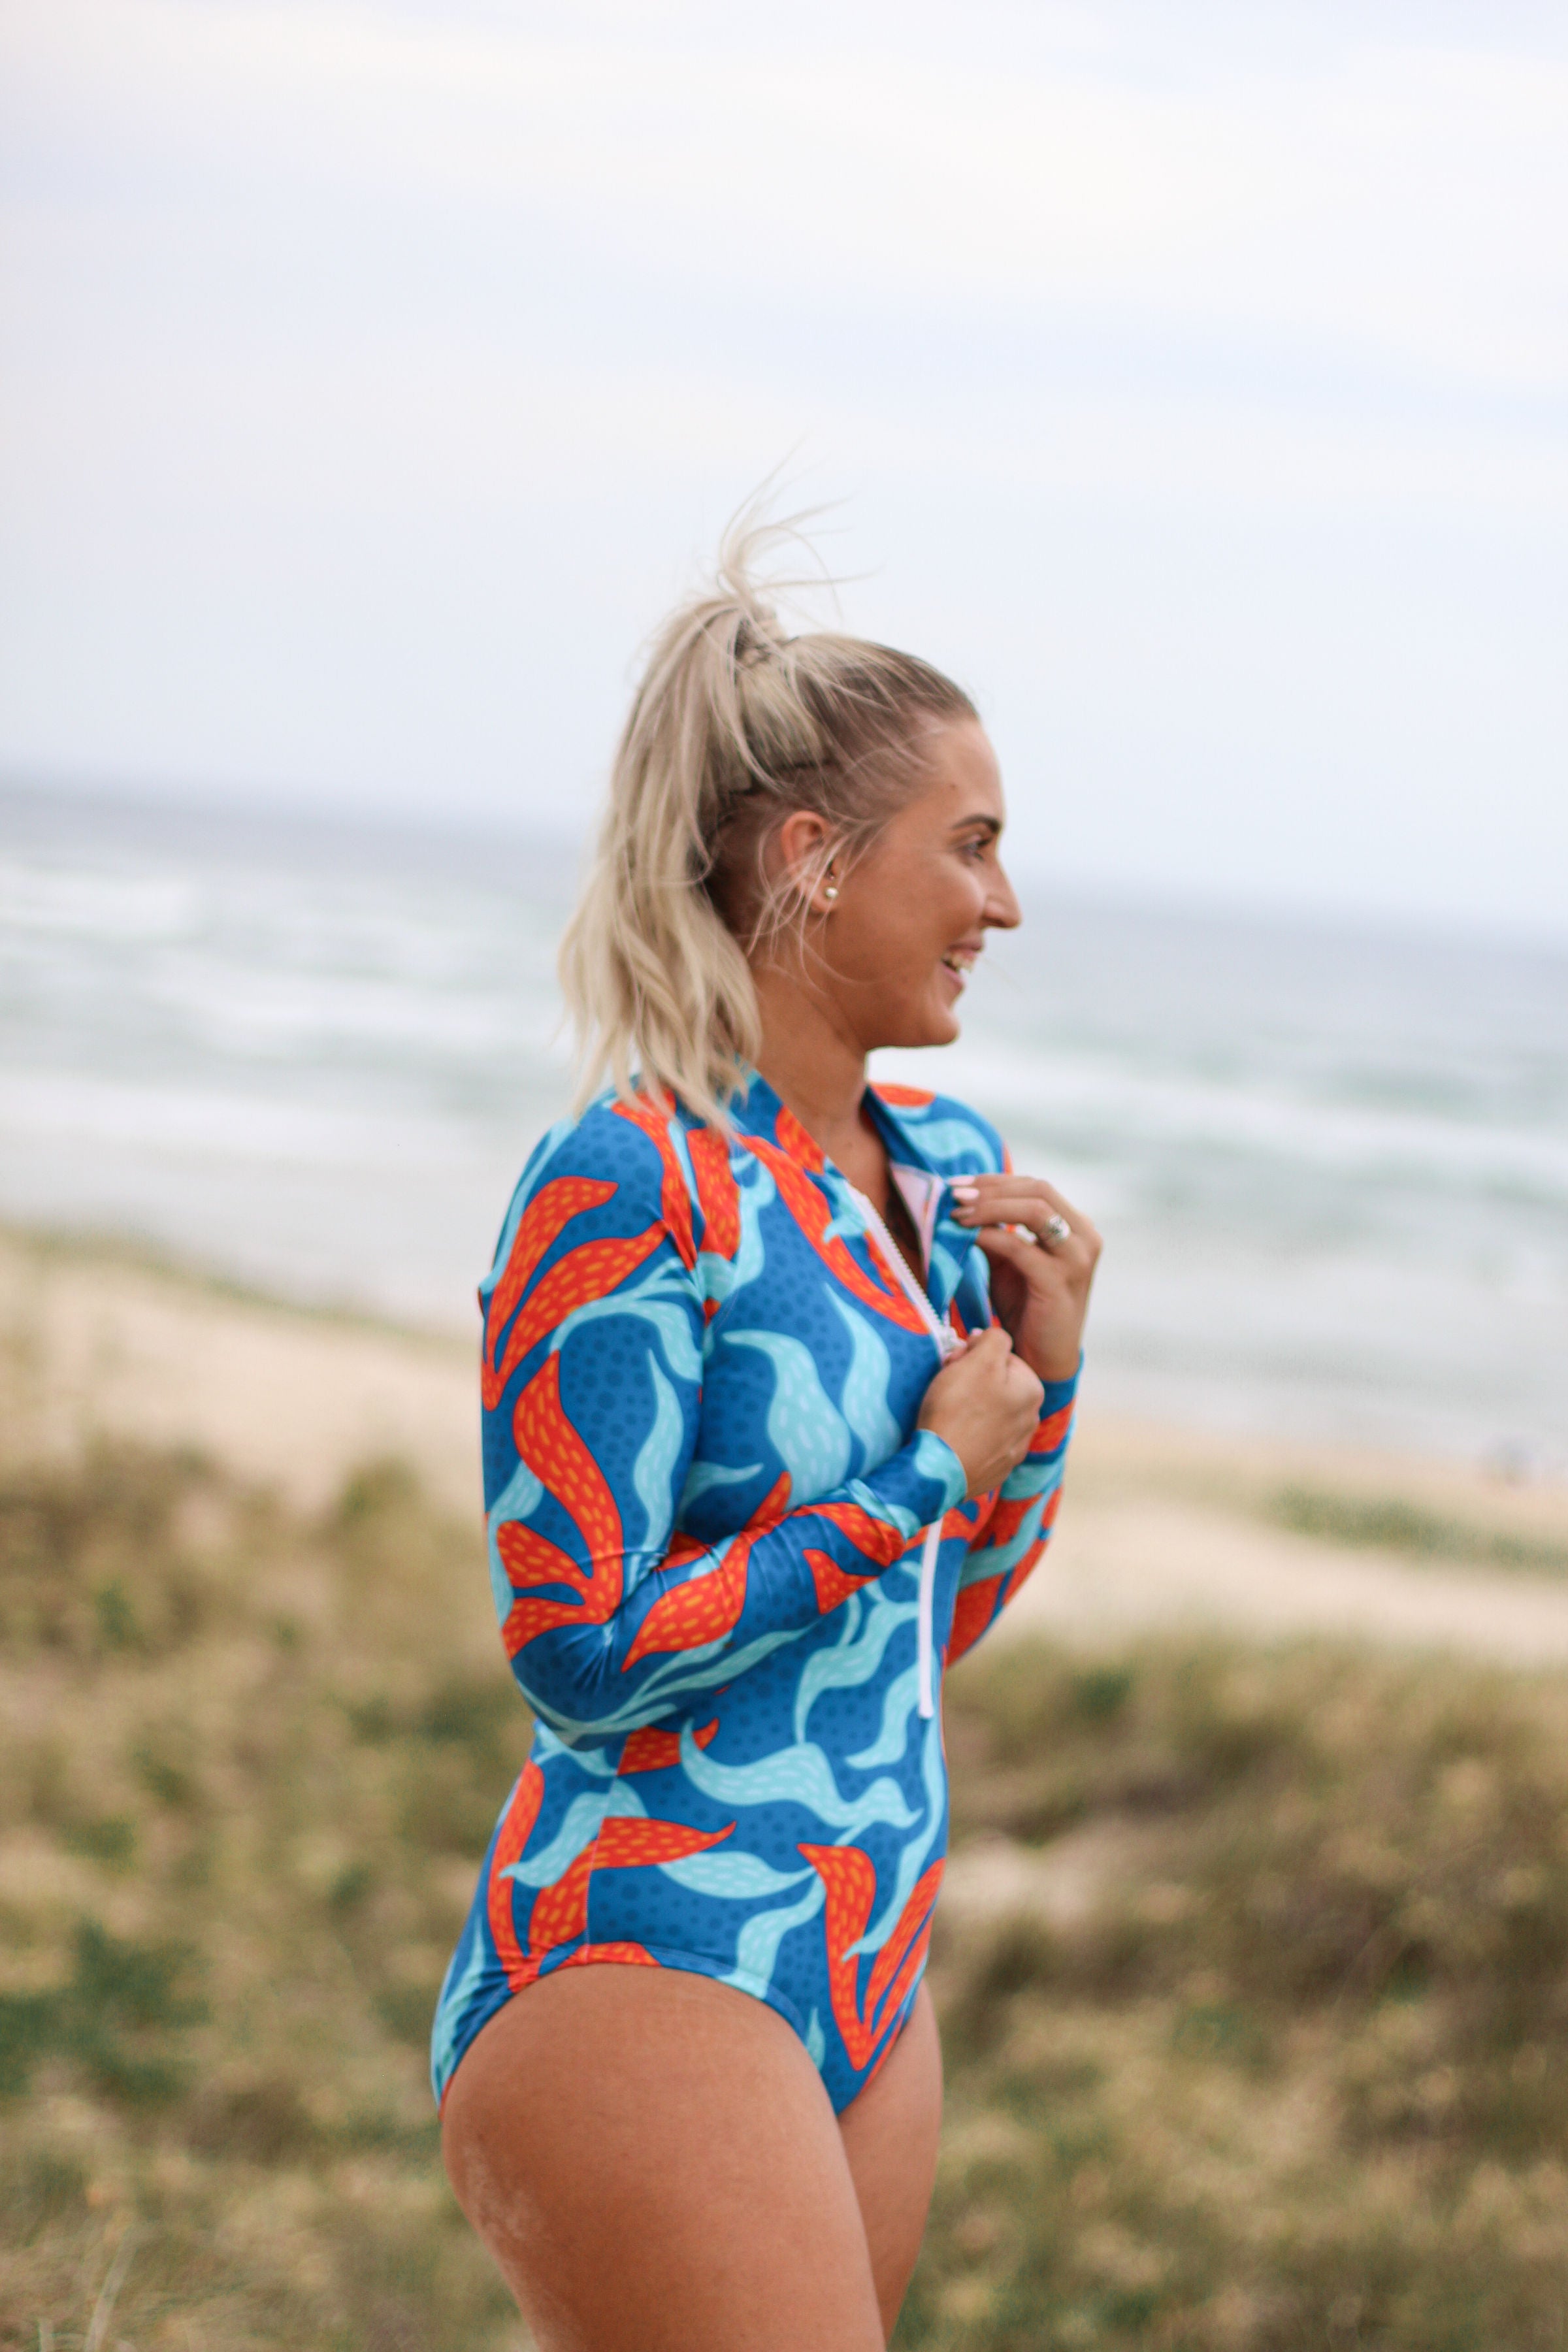 Kelp Forest Surfsuit - Women’s One Piece Long Sleeved Sunsmart and Sustainable Surfsuit